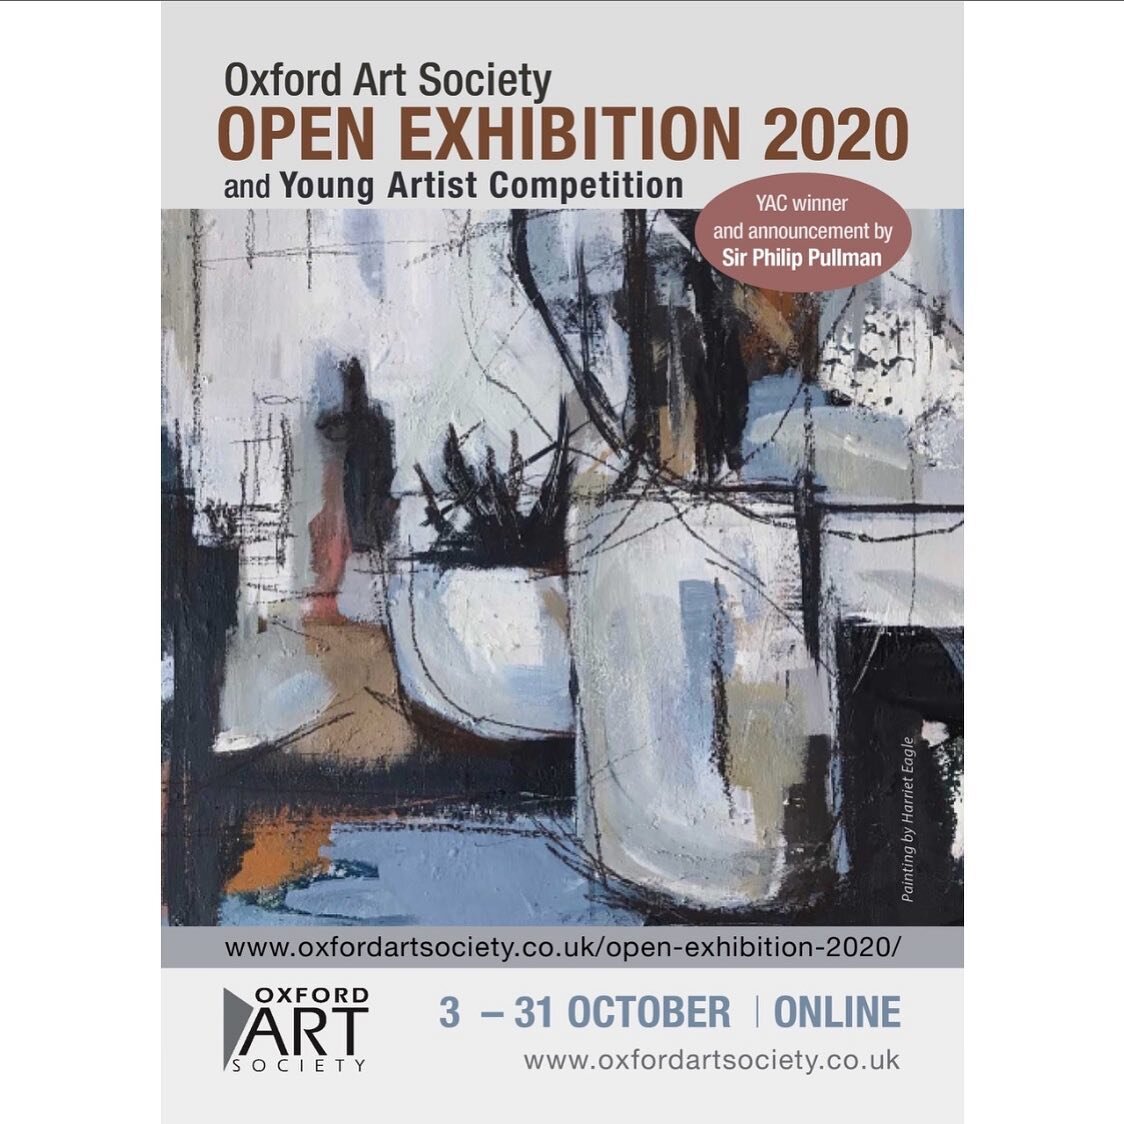 Last chance to check out the @oxfordartsociety annual exhibition. On a rainy day like this it&rsquo;s almost a blessing that the show is entirely online this year. Do take a look!